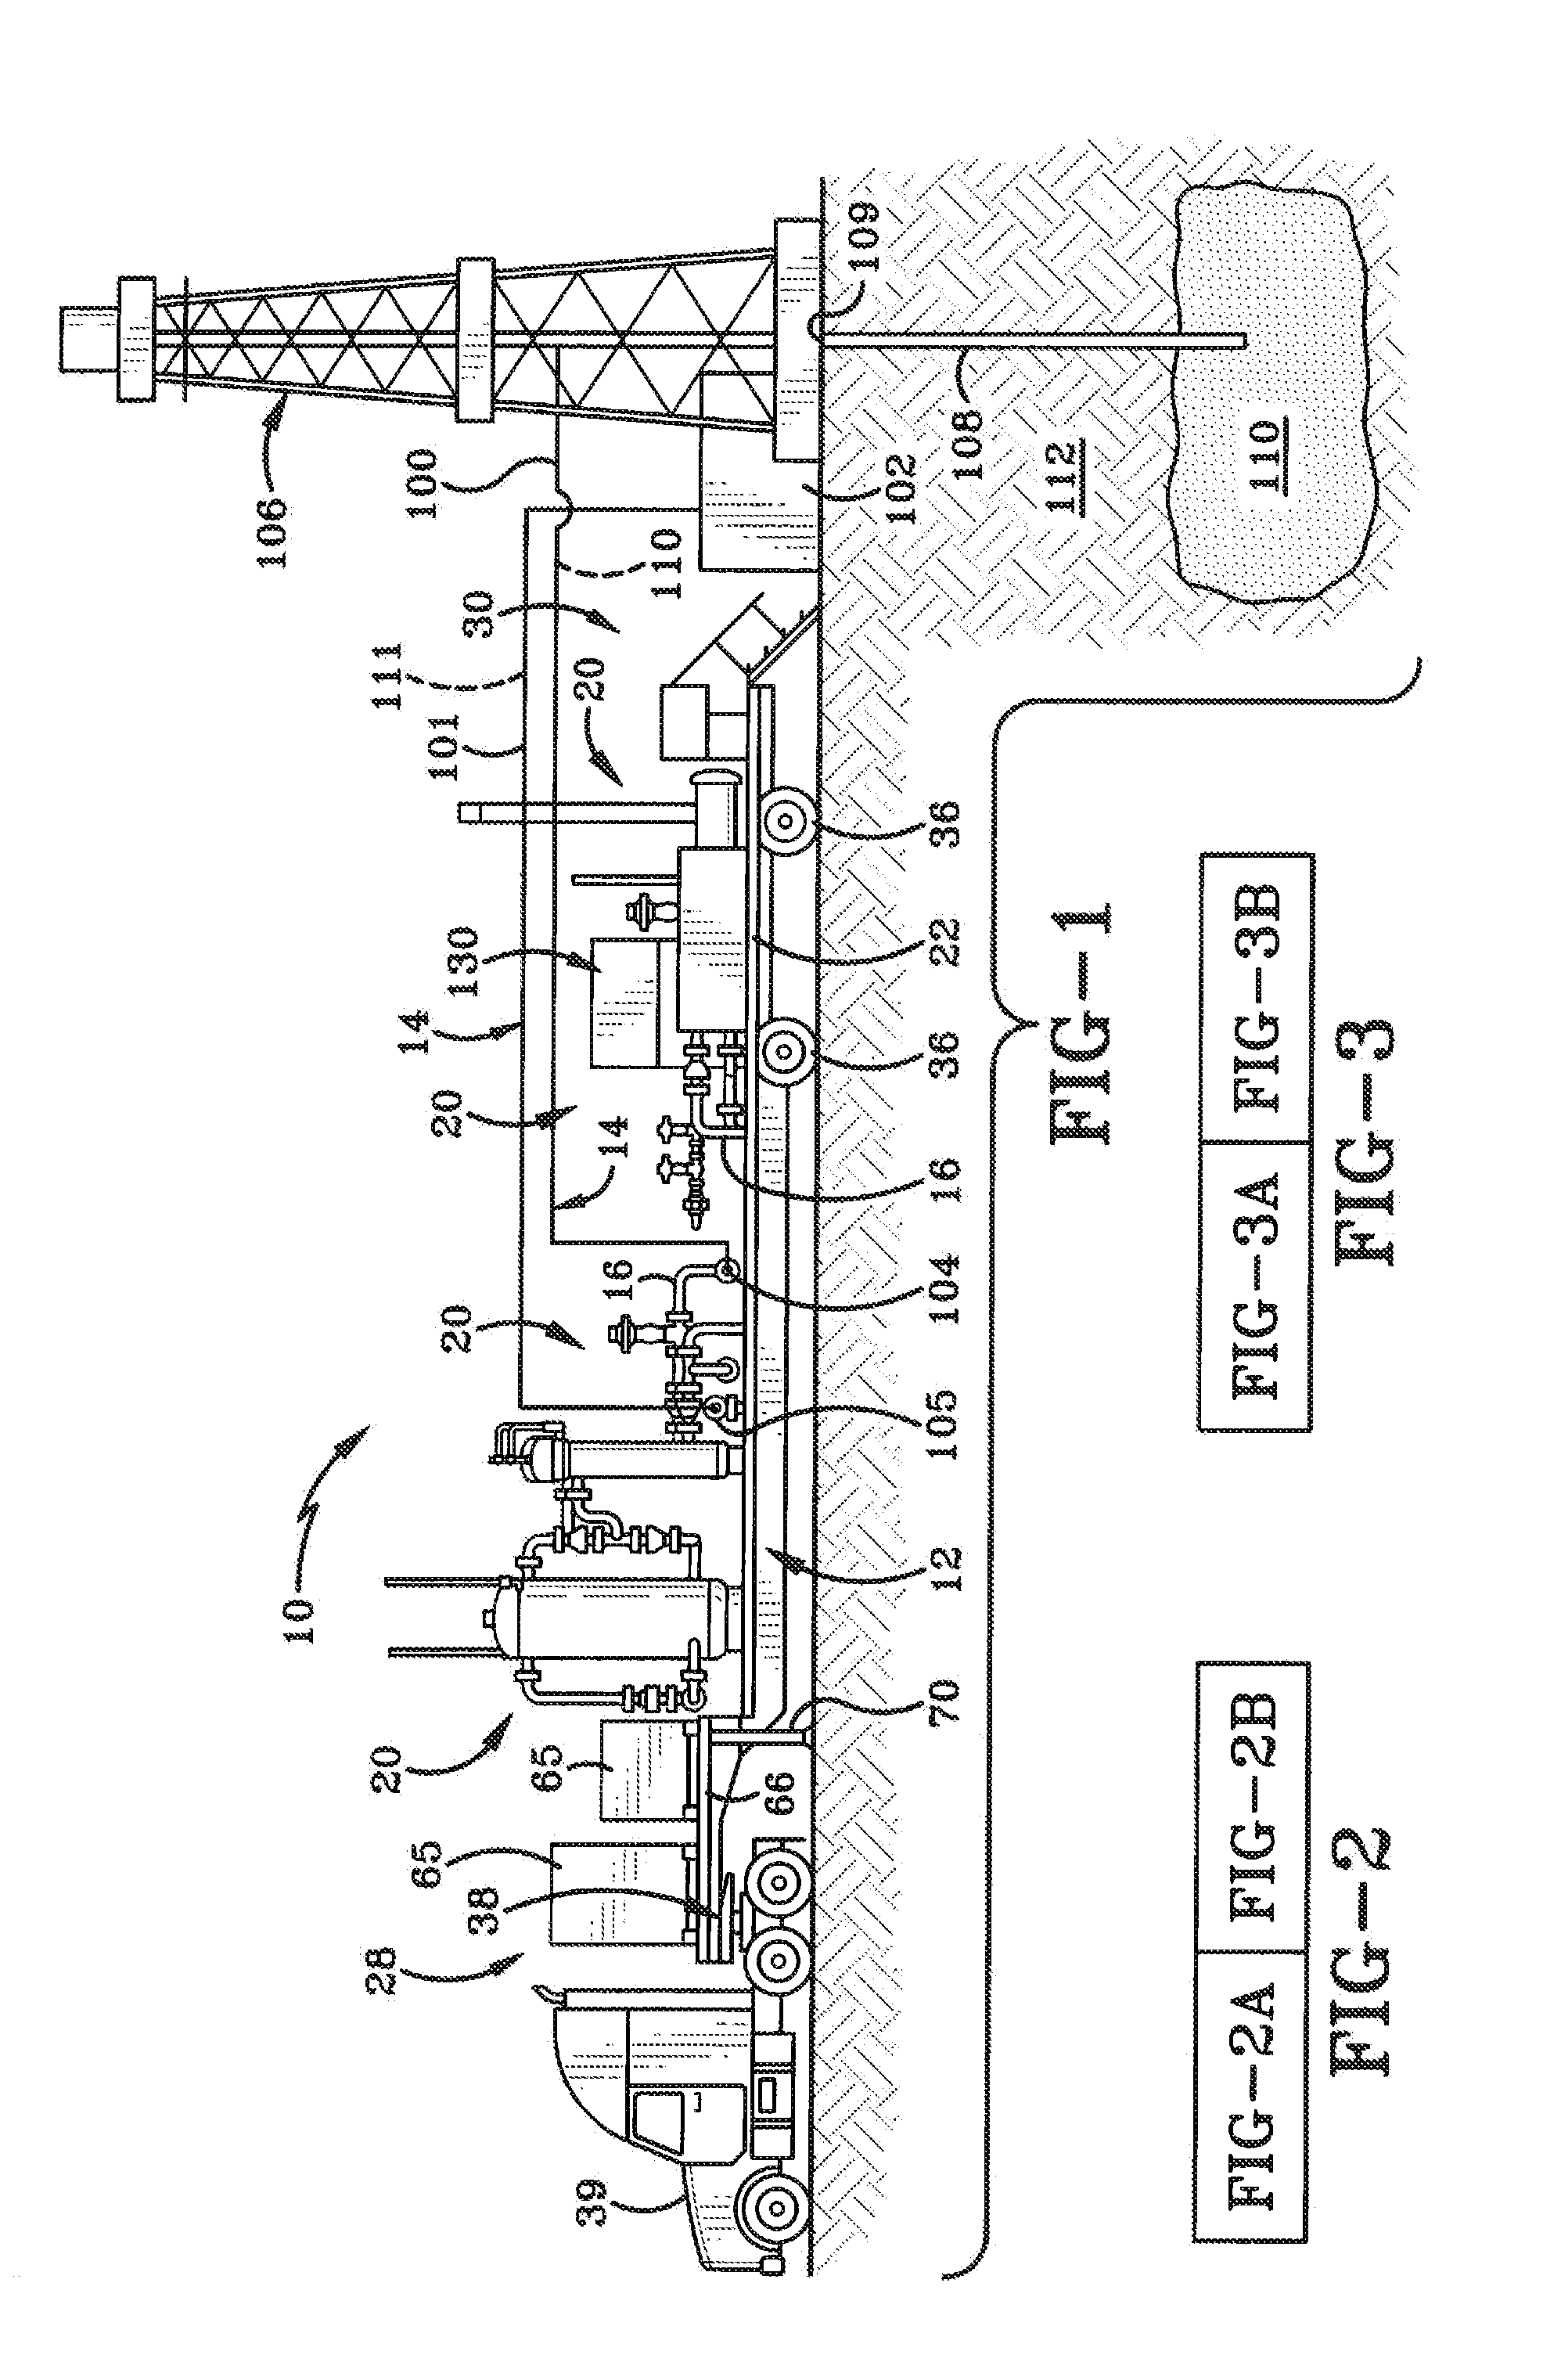 Method for operating a gas processing system